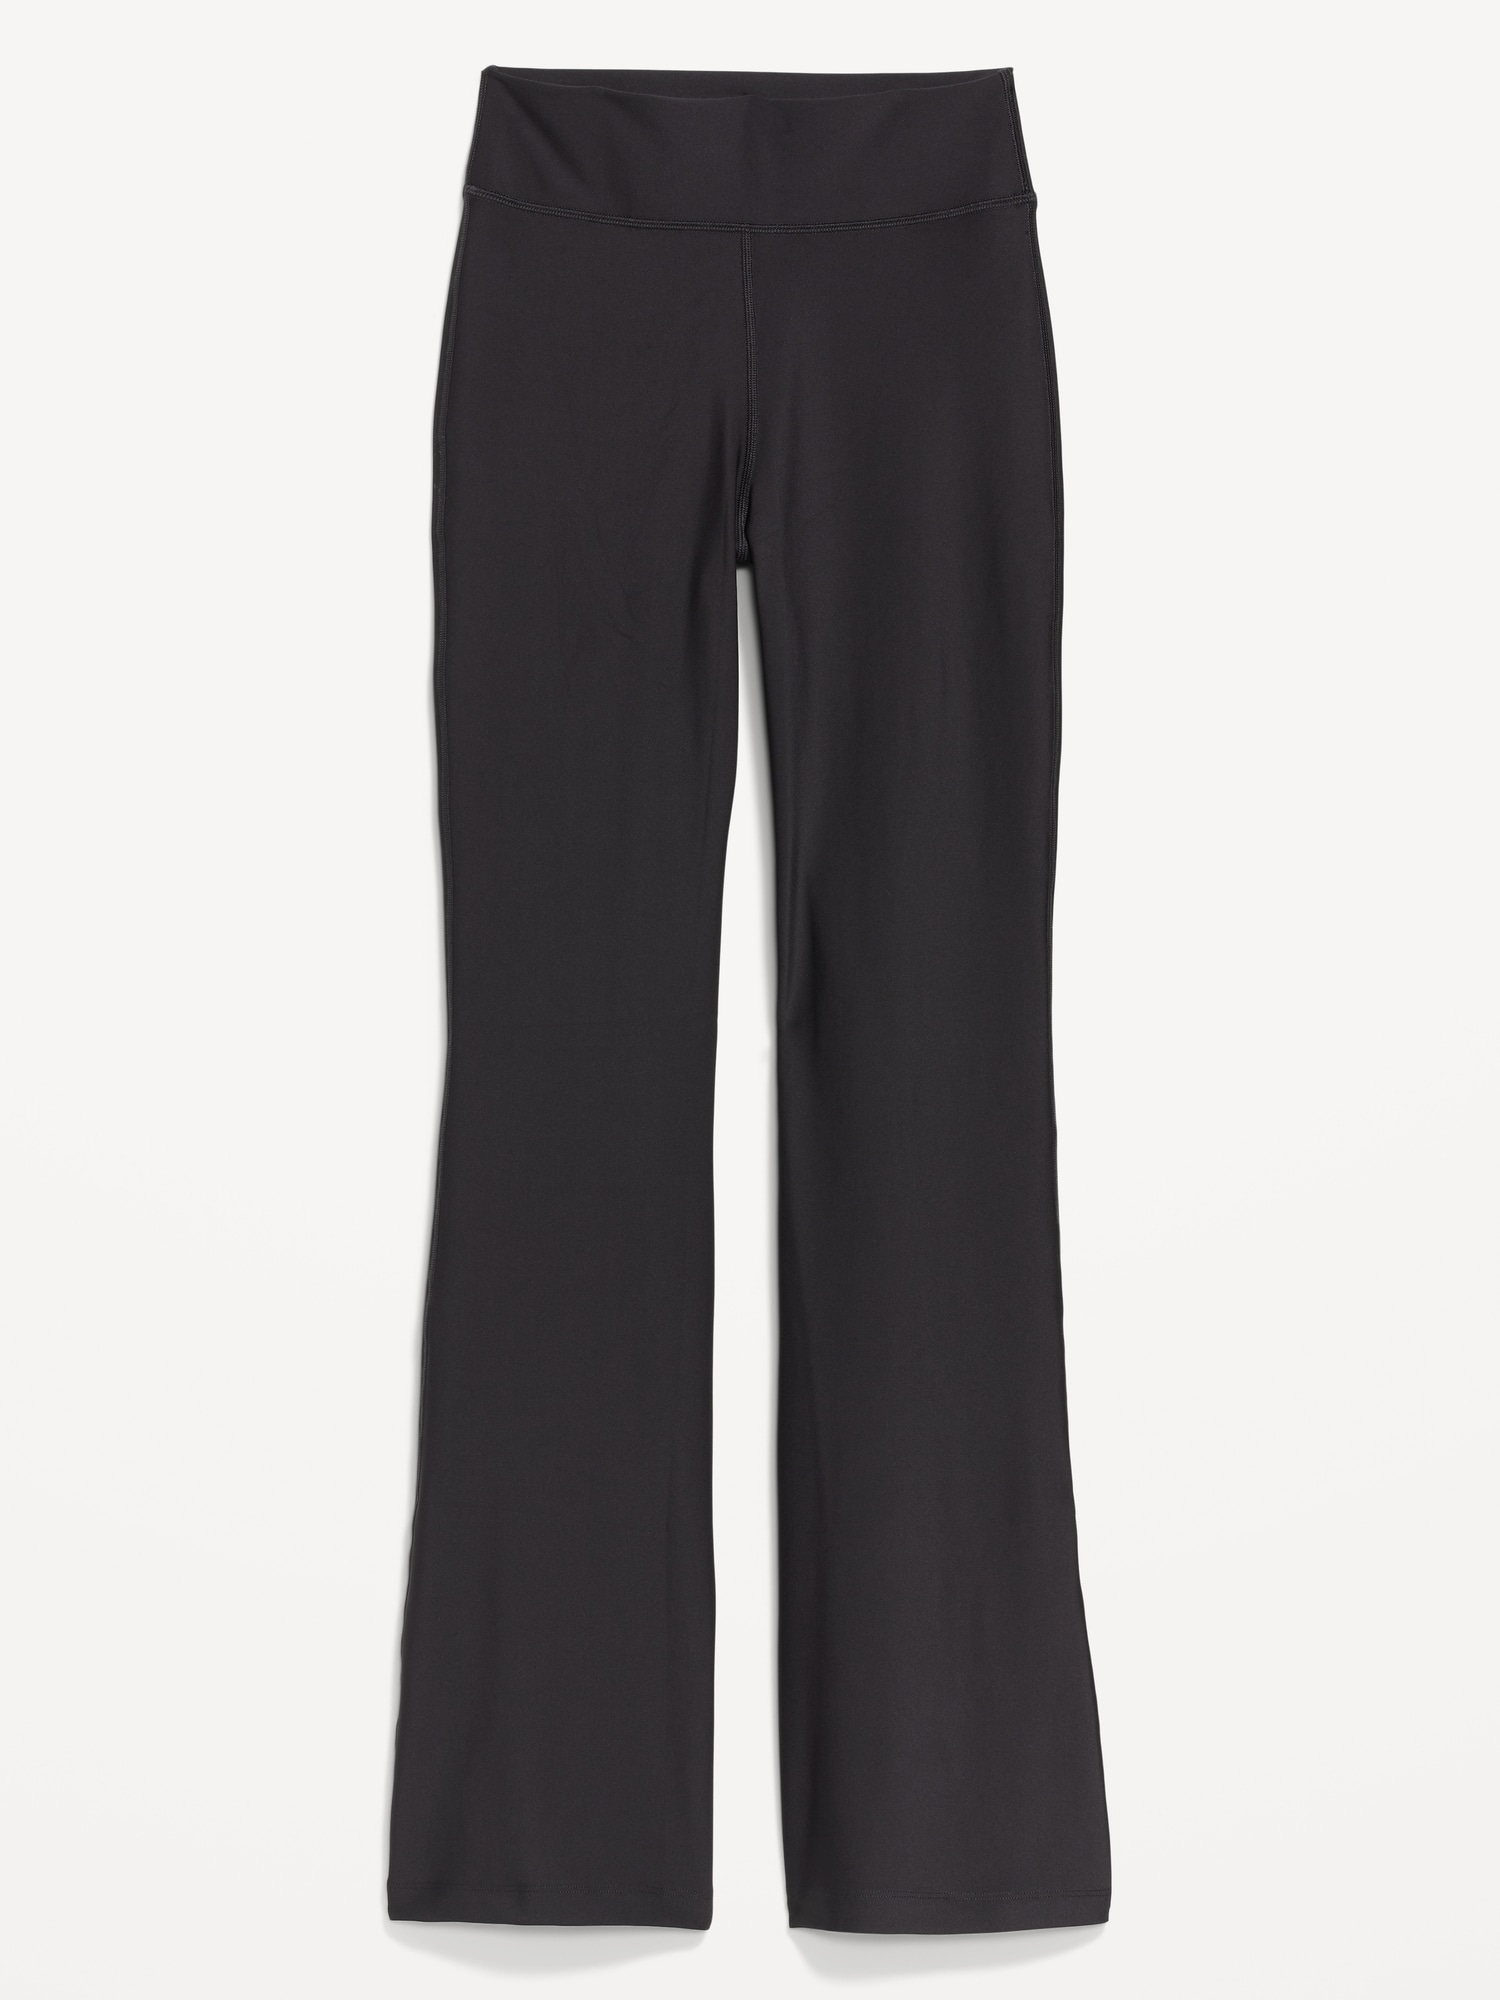 Old Navy Extra High-Waisted PowerSoft Flare Leggings for Women